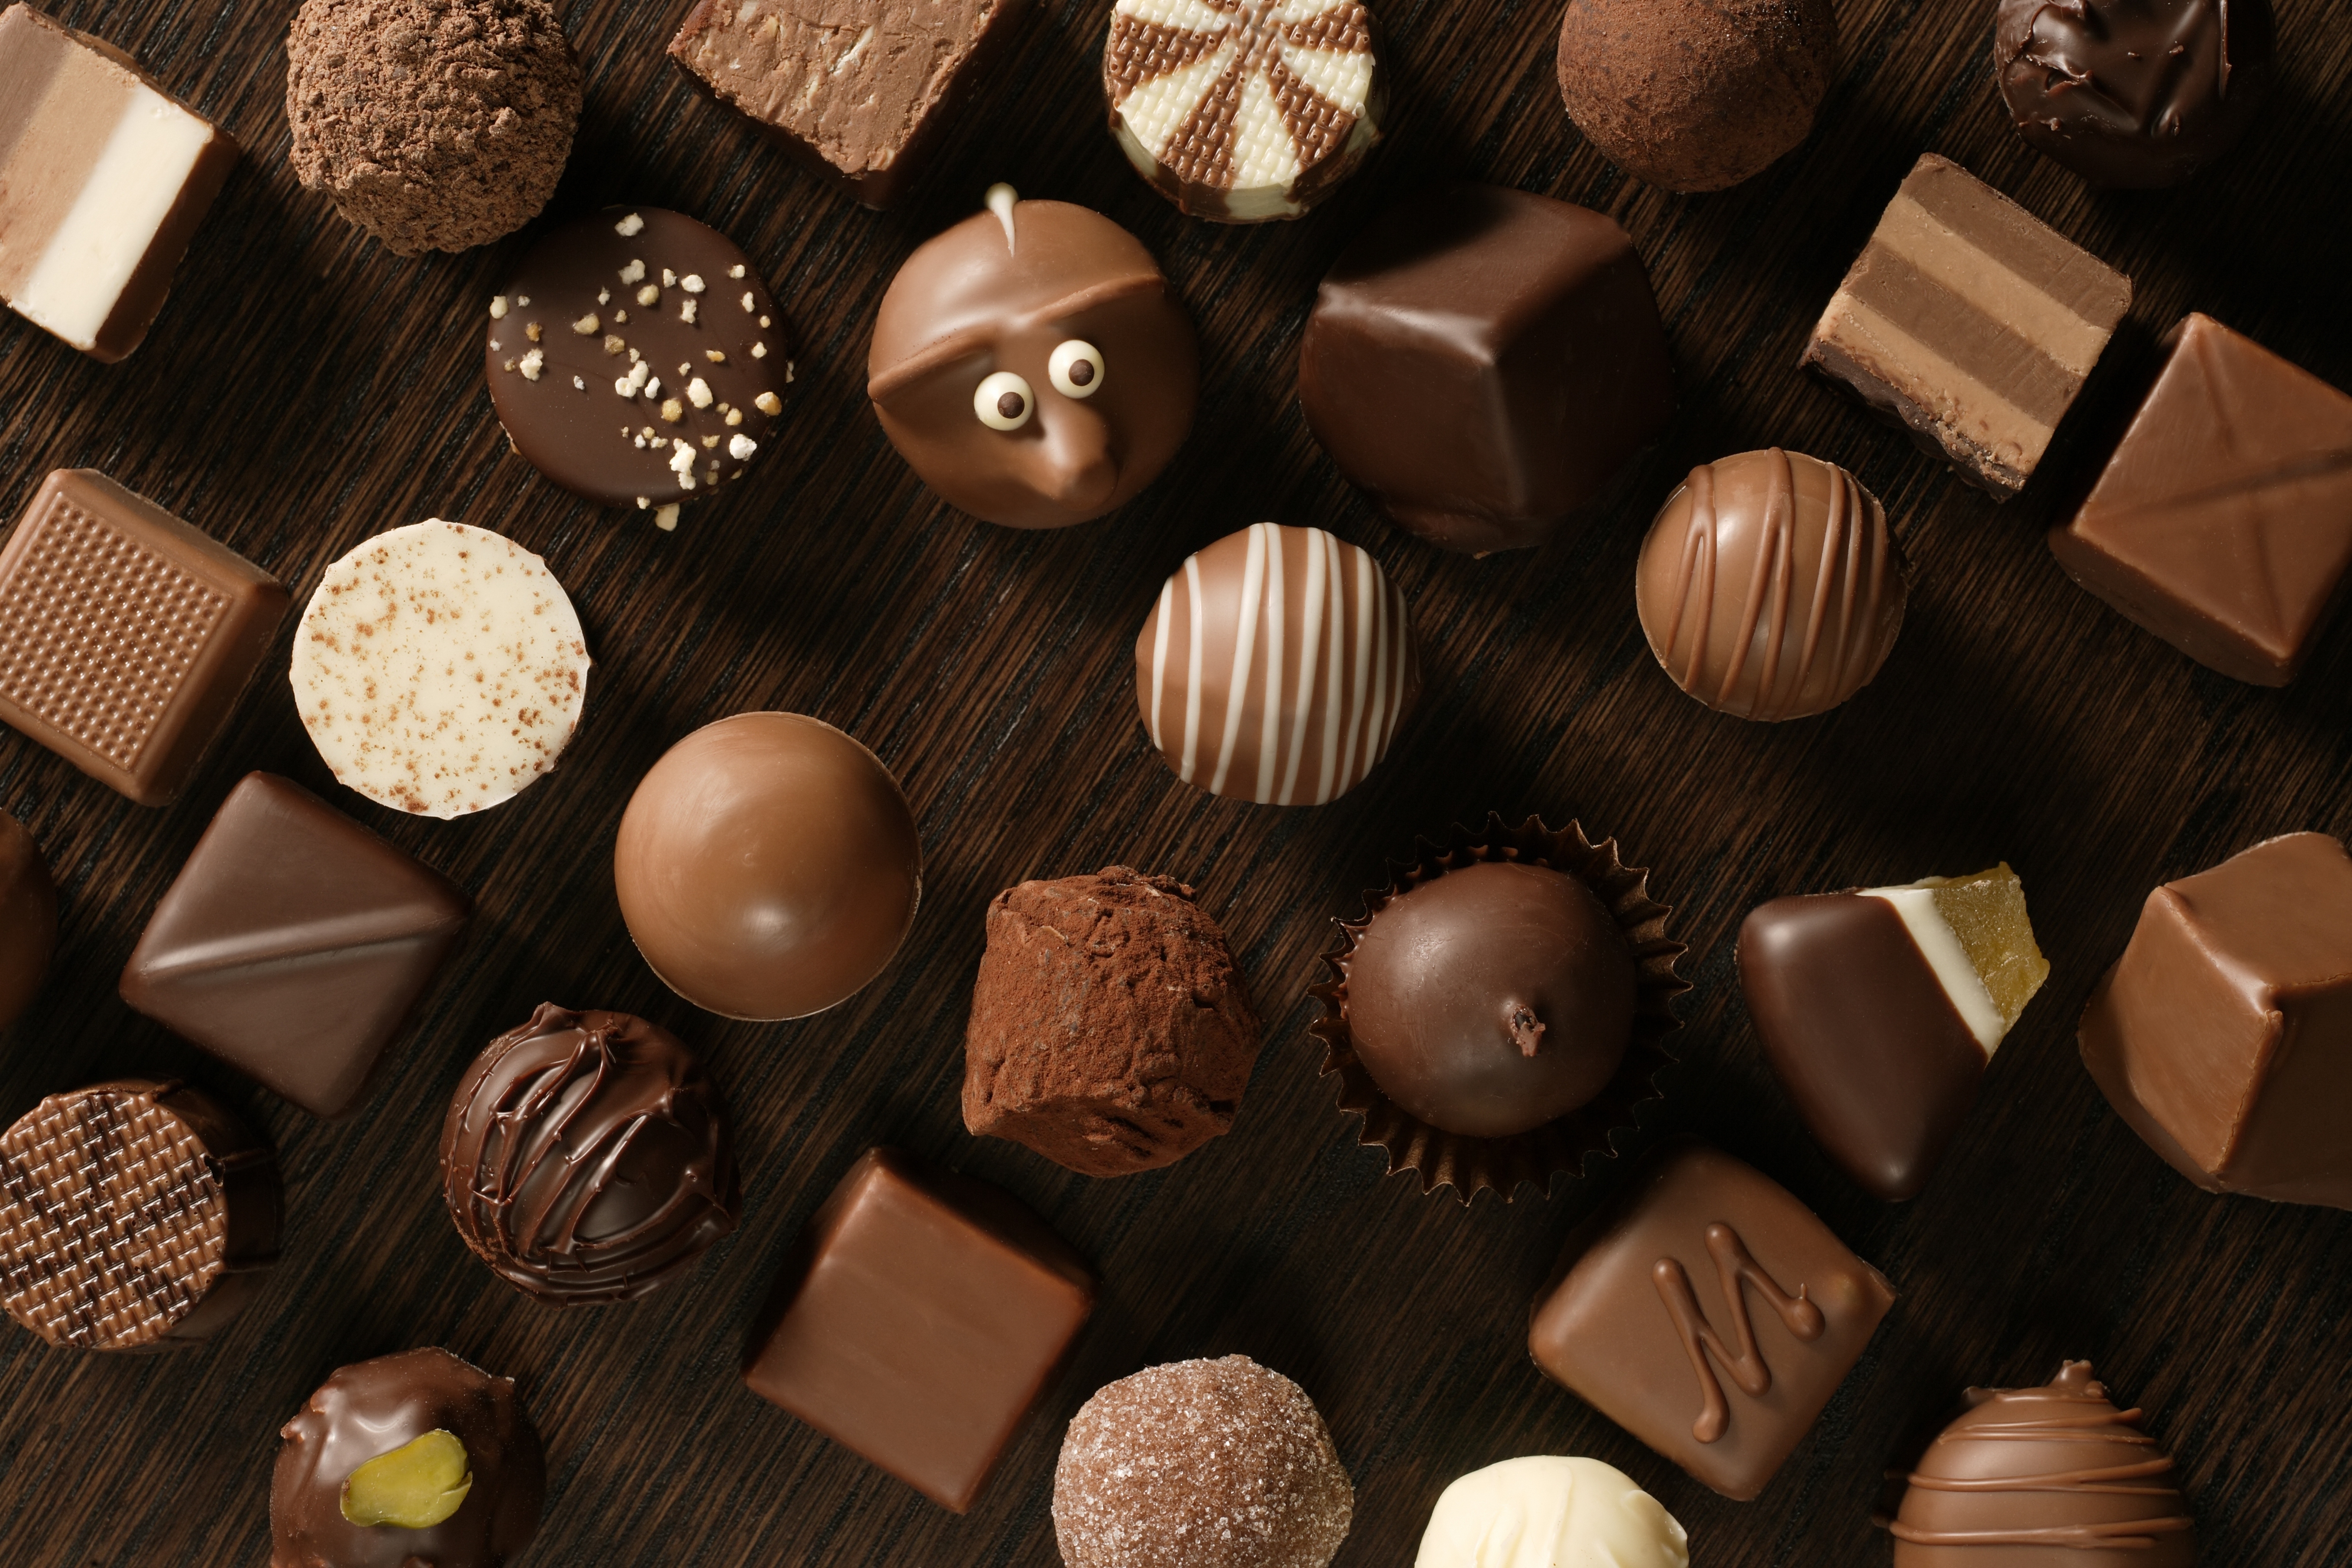 137180 download wallpaper chocolate, food, candies, eyes, table, assorted screensavers and pictures for free